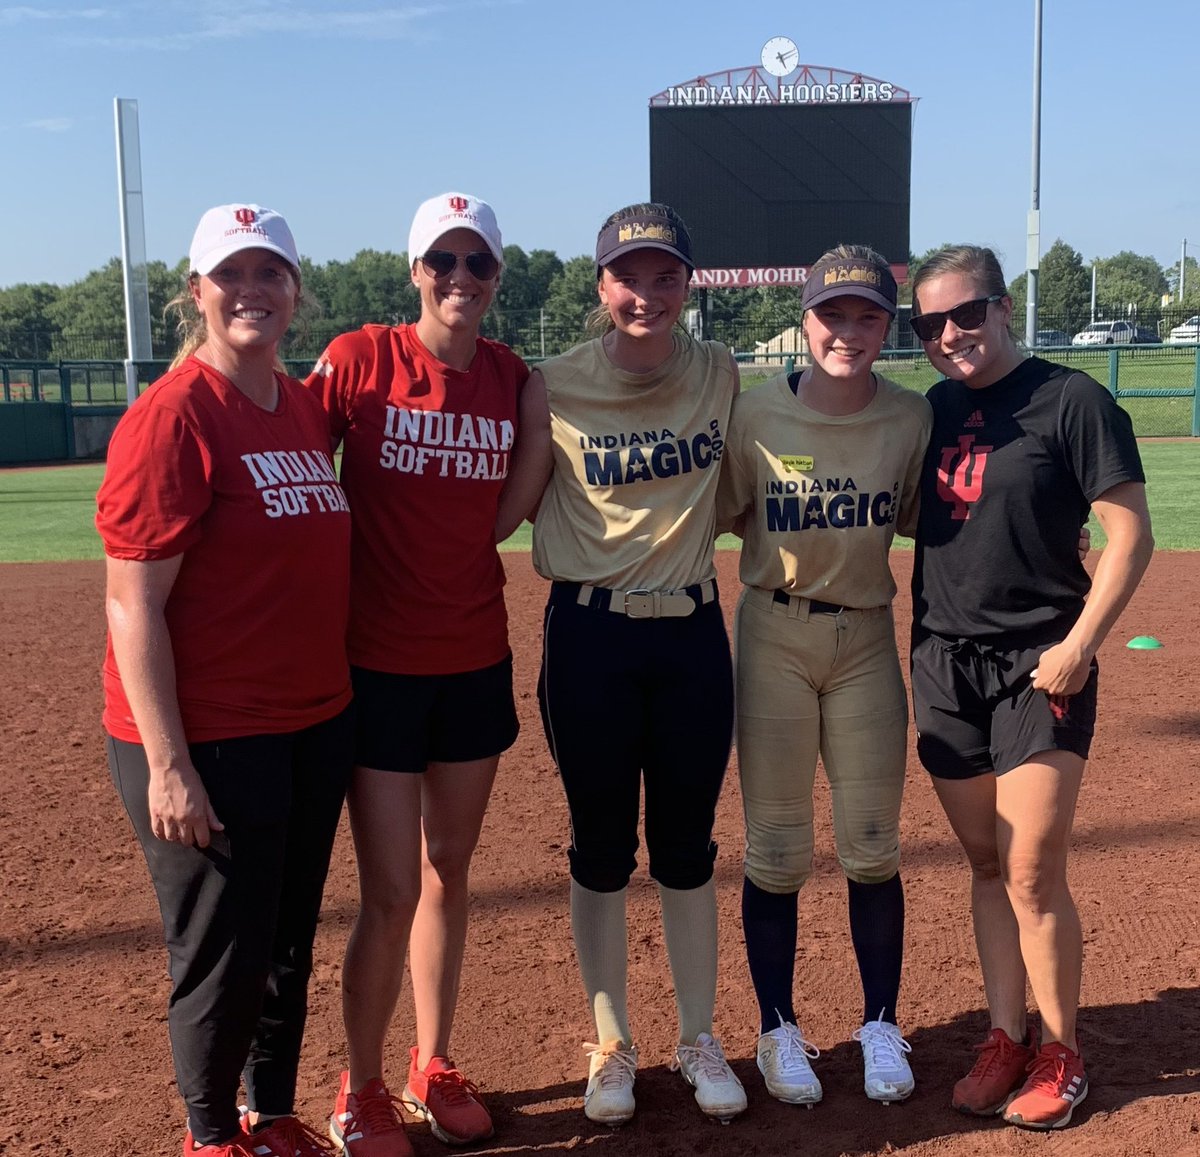 Thank you @CoachStanton and @ChandaBell2 for putting on a great camp!! I also had a great time with my teammate @MakaylaWatson26!!! Can’t wait to come back! @IMG08BenGod @Los_Stuff @ExtraInningSB @LegacyLegendsS1